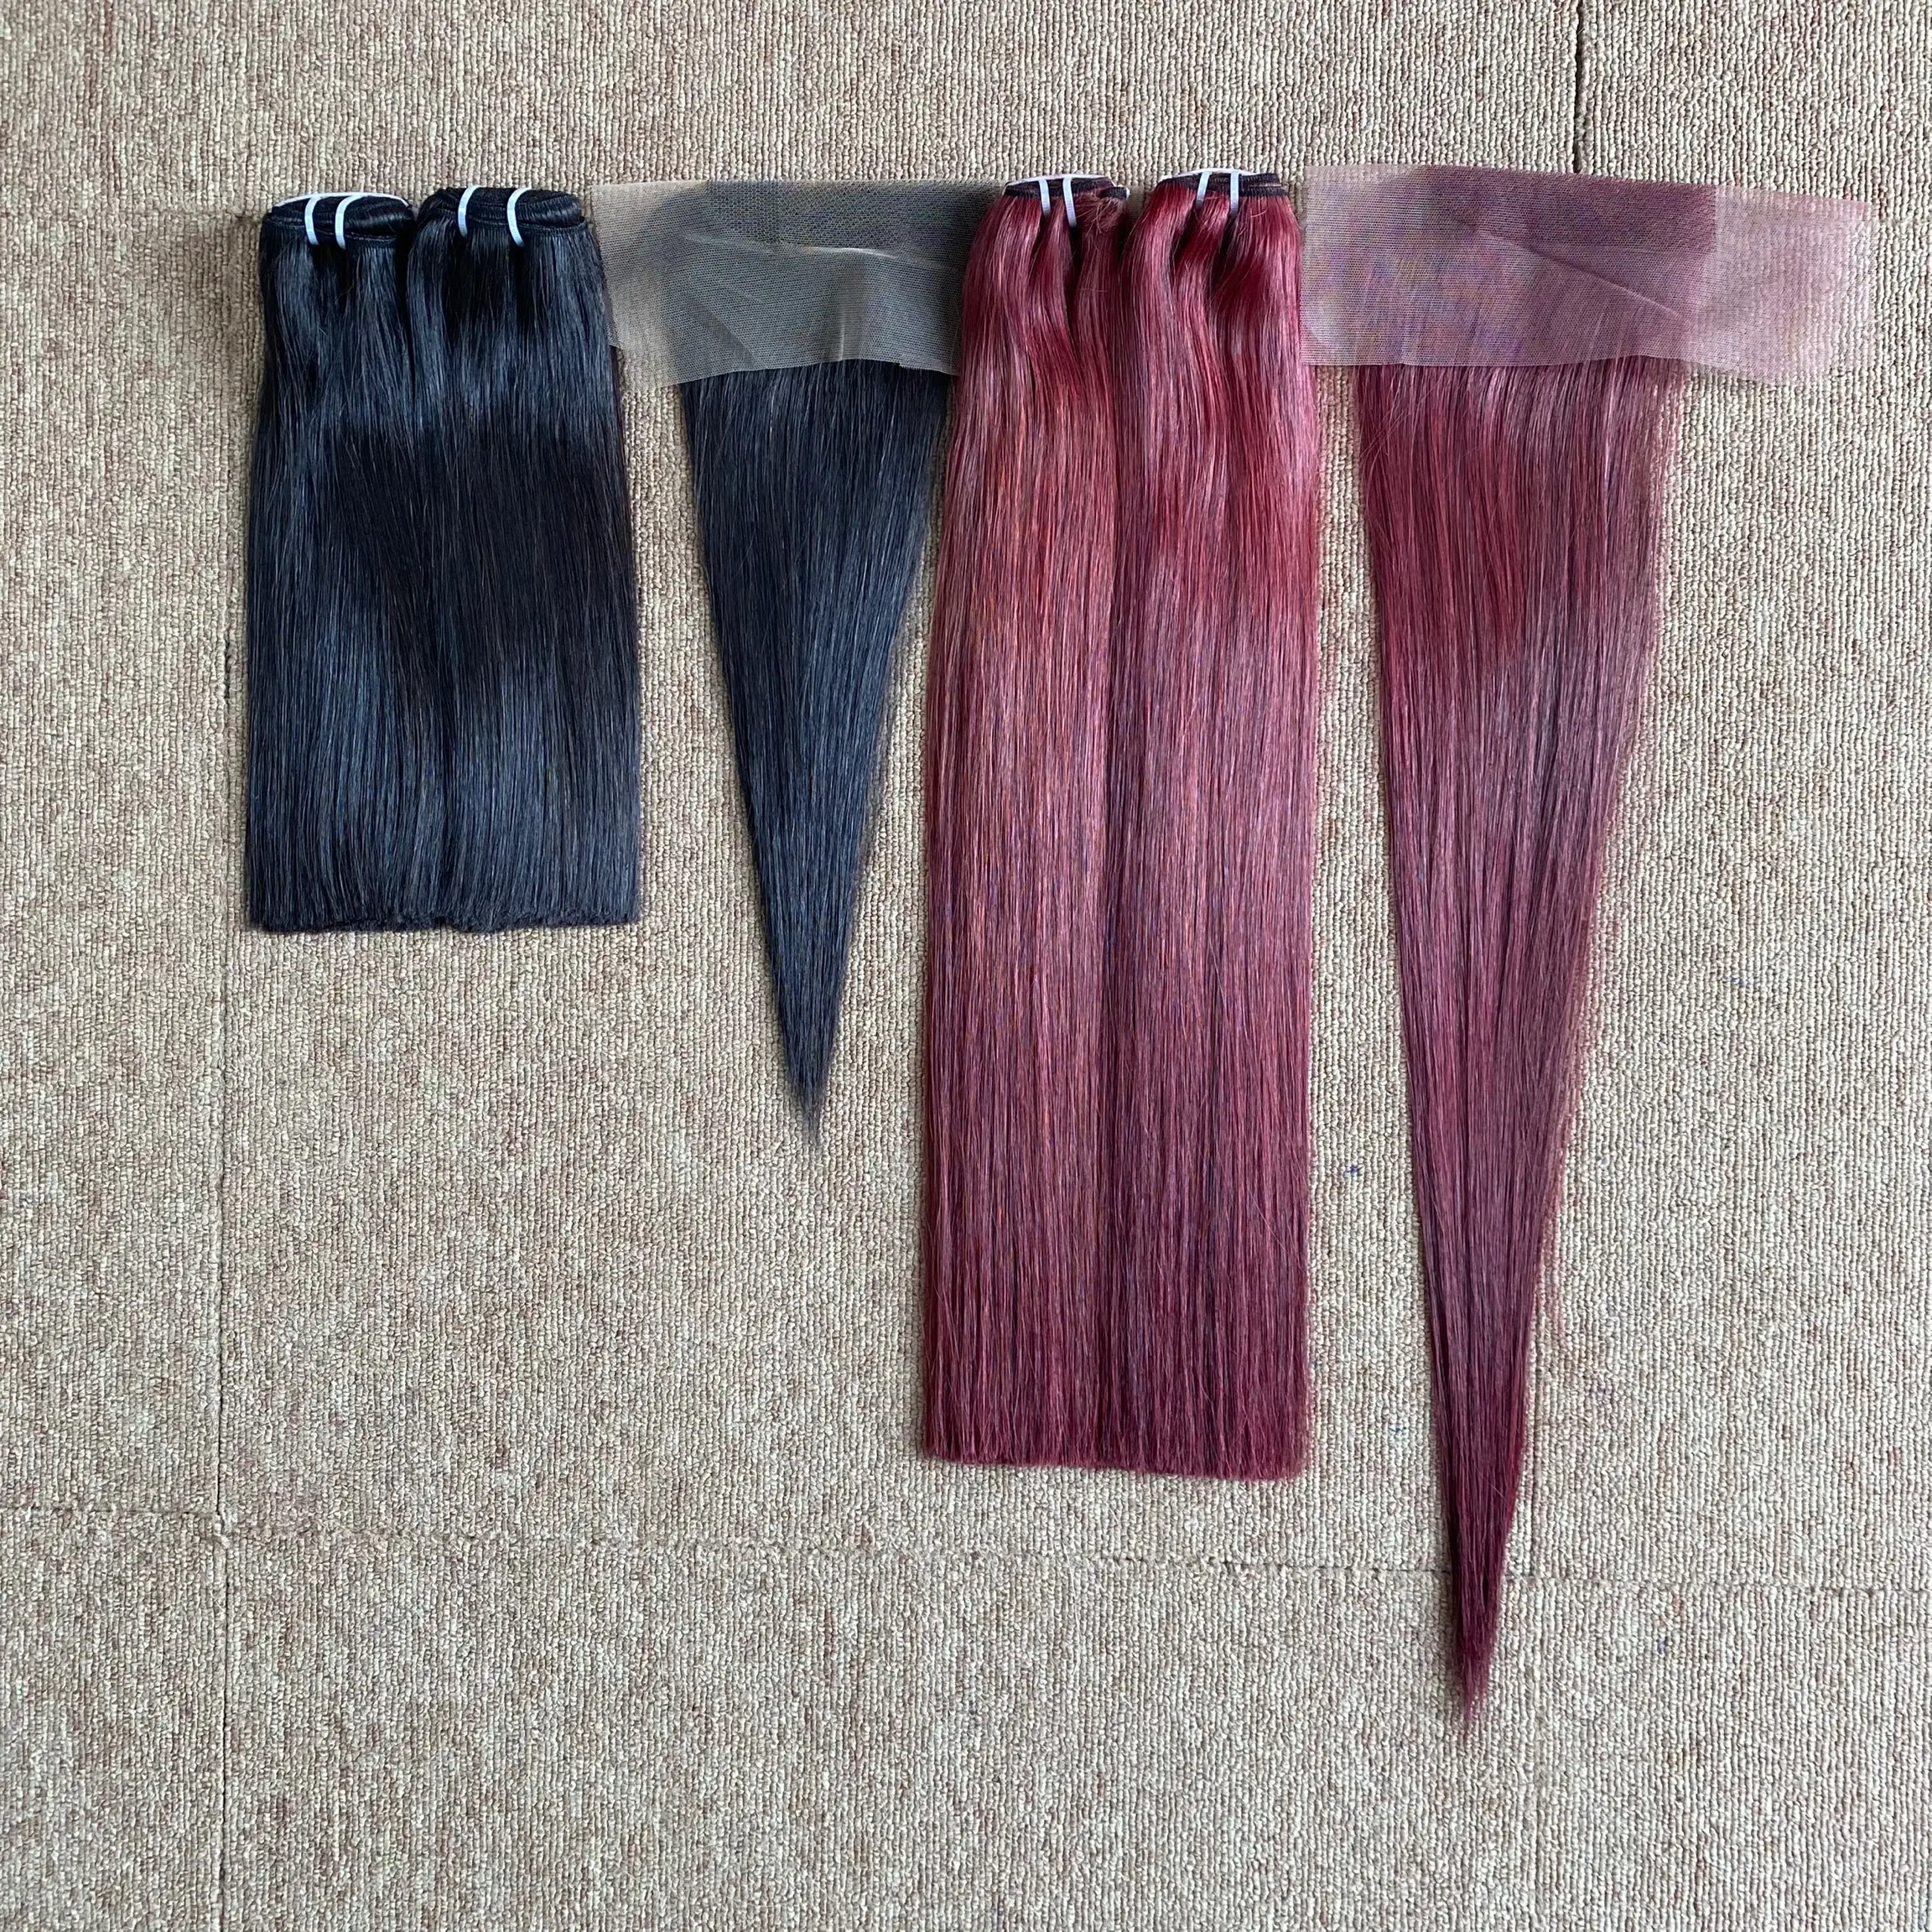 Wine color bone straight hot selling pattern super silky hair extension real human hair from Vietnamese Supplier Cuticle Aligned